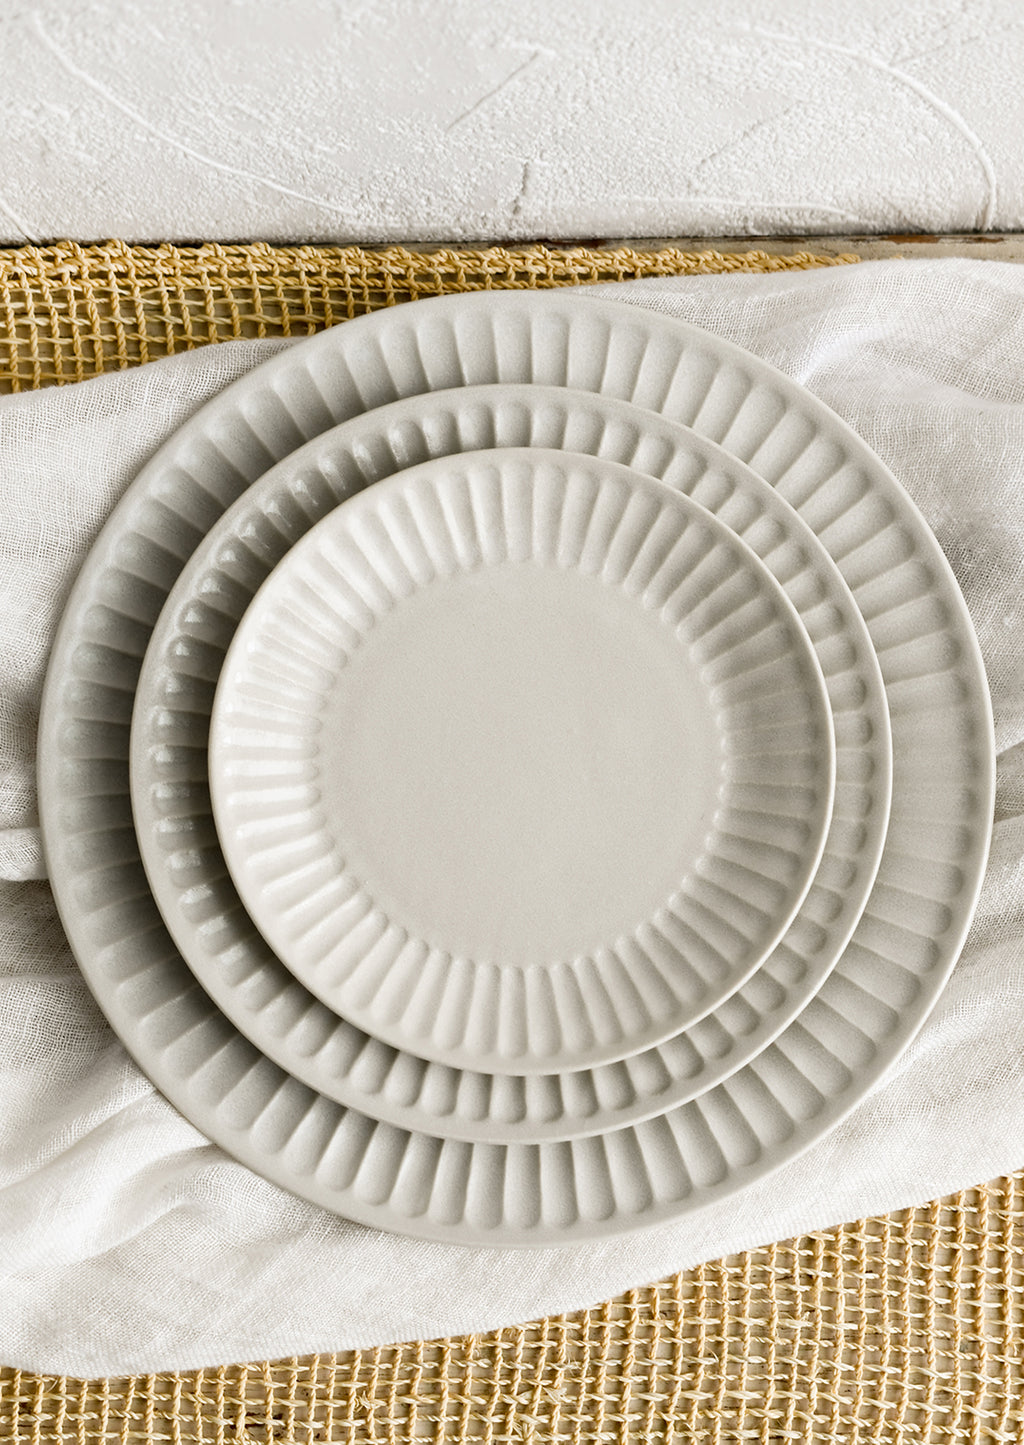 2: White fluted plates in three incremental sizes.